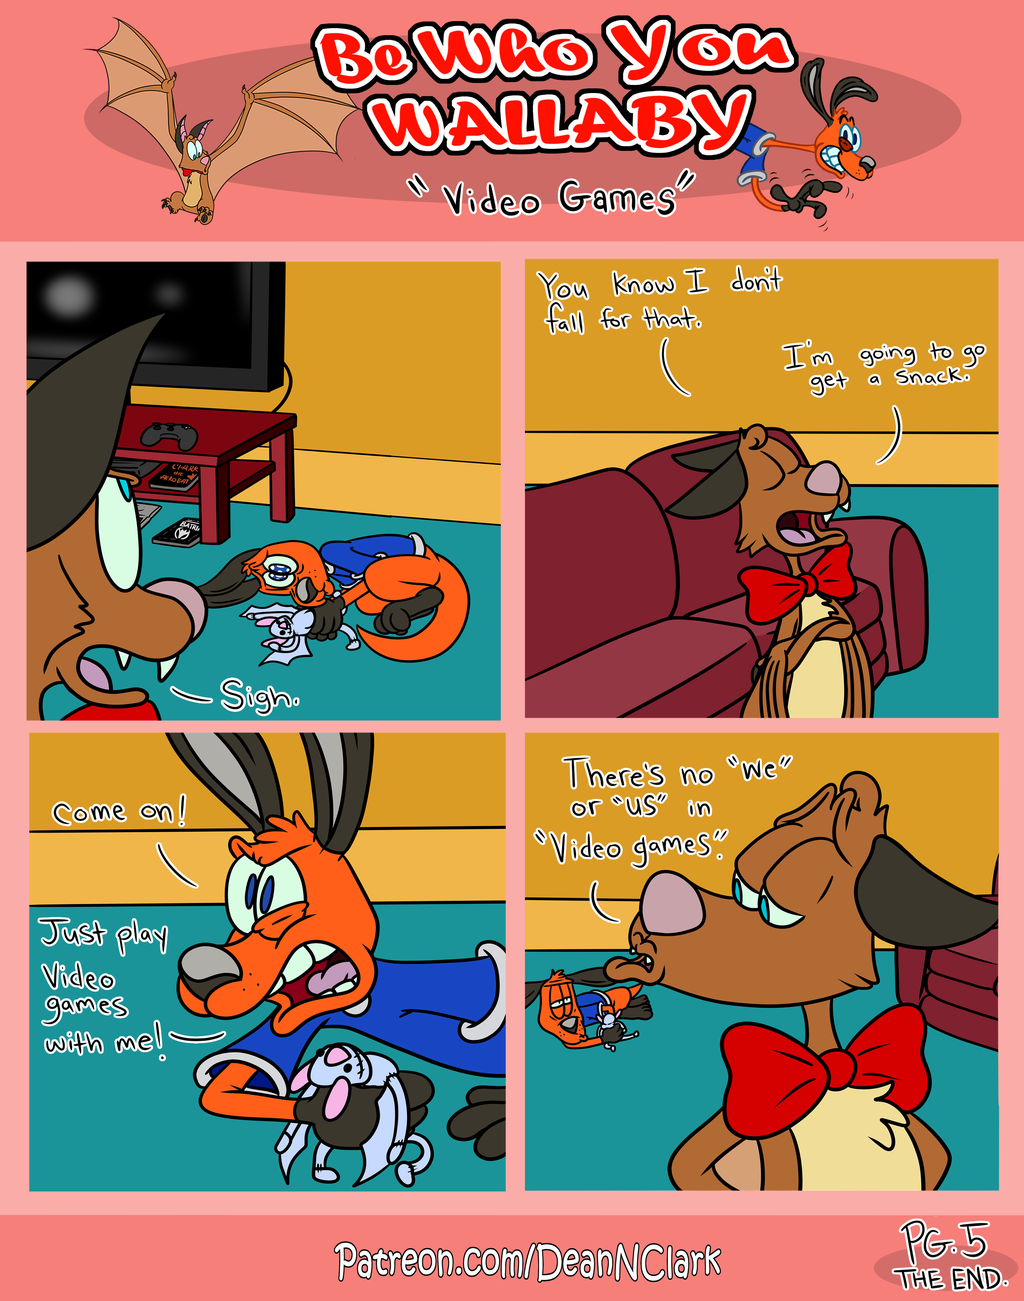 Be Who You Wallaby, VIDEO GAMES, Pg. 5 THE END